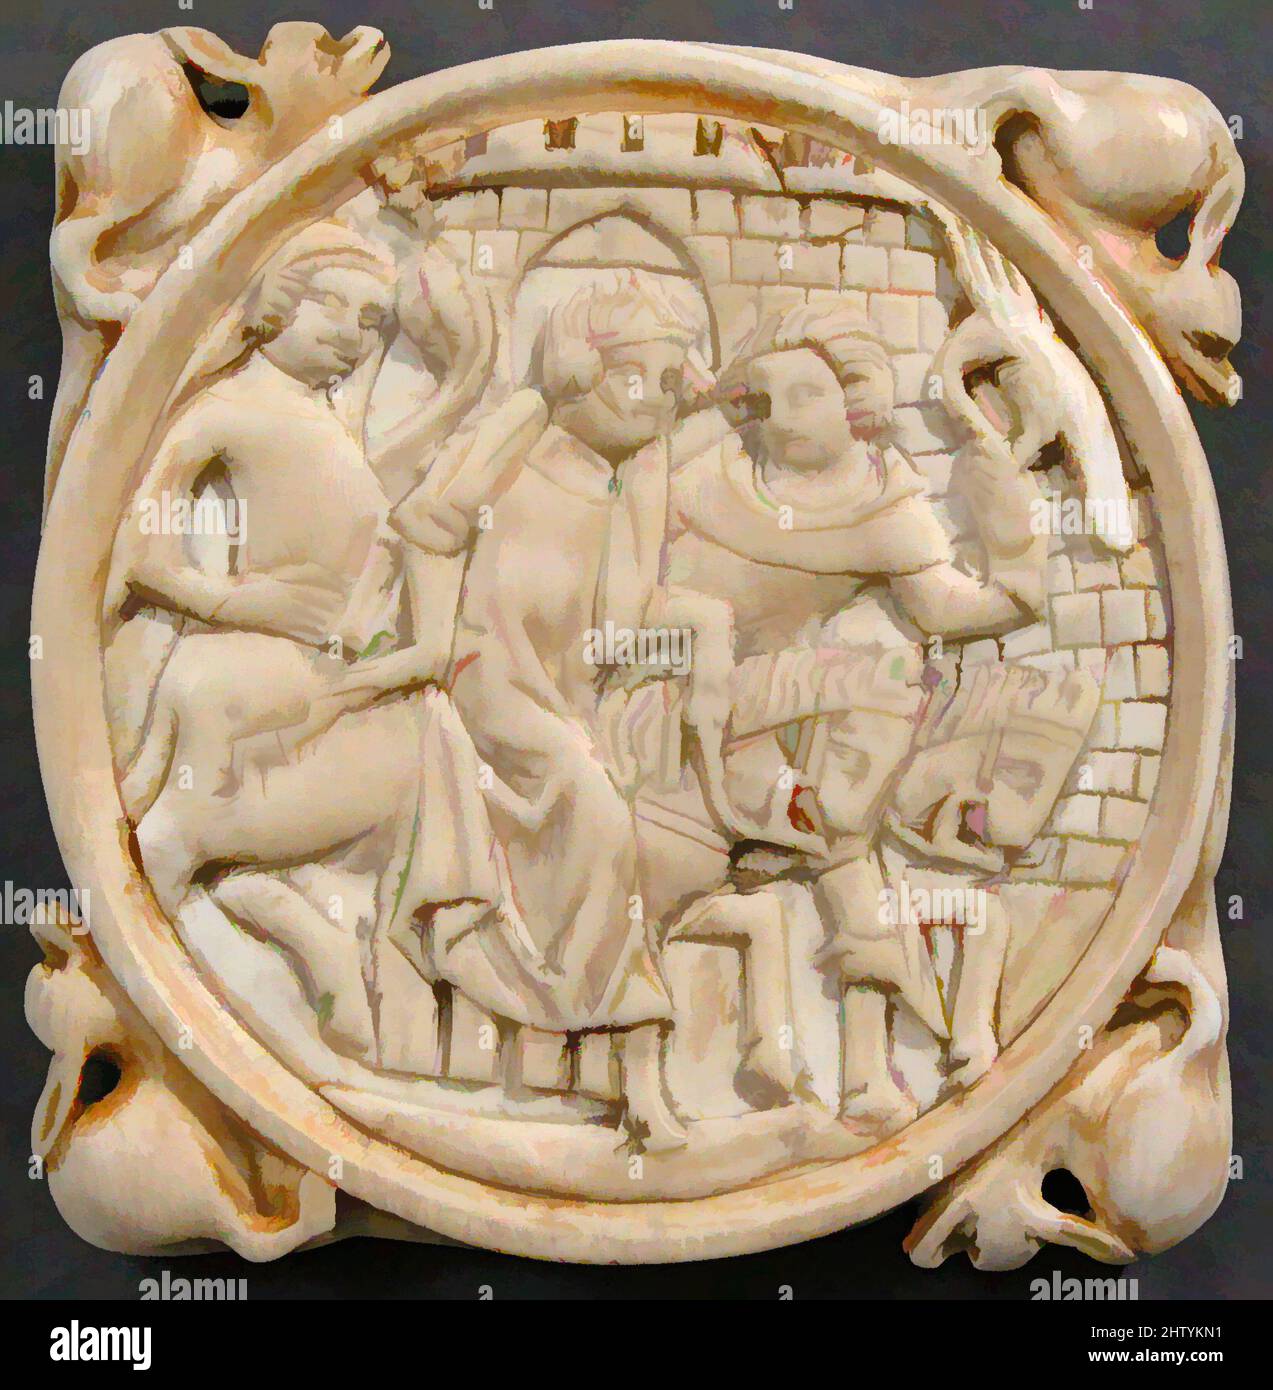 Art inspired by Mirror Case, ca. 1350, Made in France, French, Ivory, Overall: 3 1/4 x 3/8 in. (8.2 x 1 cm), Ivories, Ivory mirror cases were usually carved in pairs to protect a polished metal disk within. Few pairs survive today, and none with their original protective leather case, Classic works modernized by Artotop with a splash of modernity. Shapes, color and value, eye-catching visual impact on art. Emotions through freedom of artworks in a contemporary way. A timeless message pursuing a wildly creative new direction. Artists turning to the digital medium and creating the Artotop NFT Stock Photo